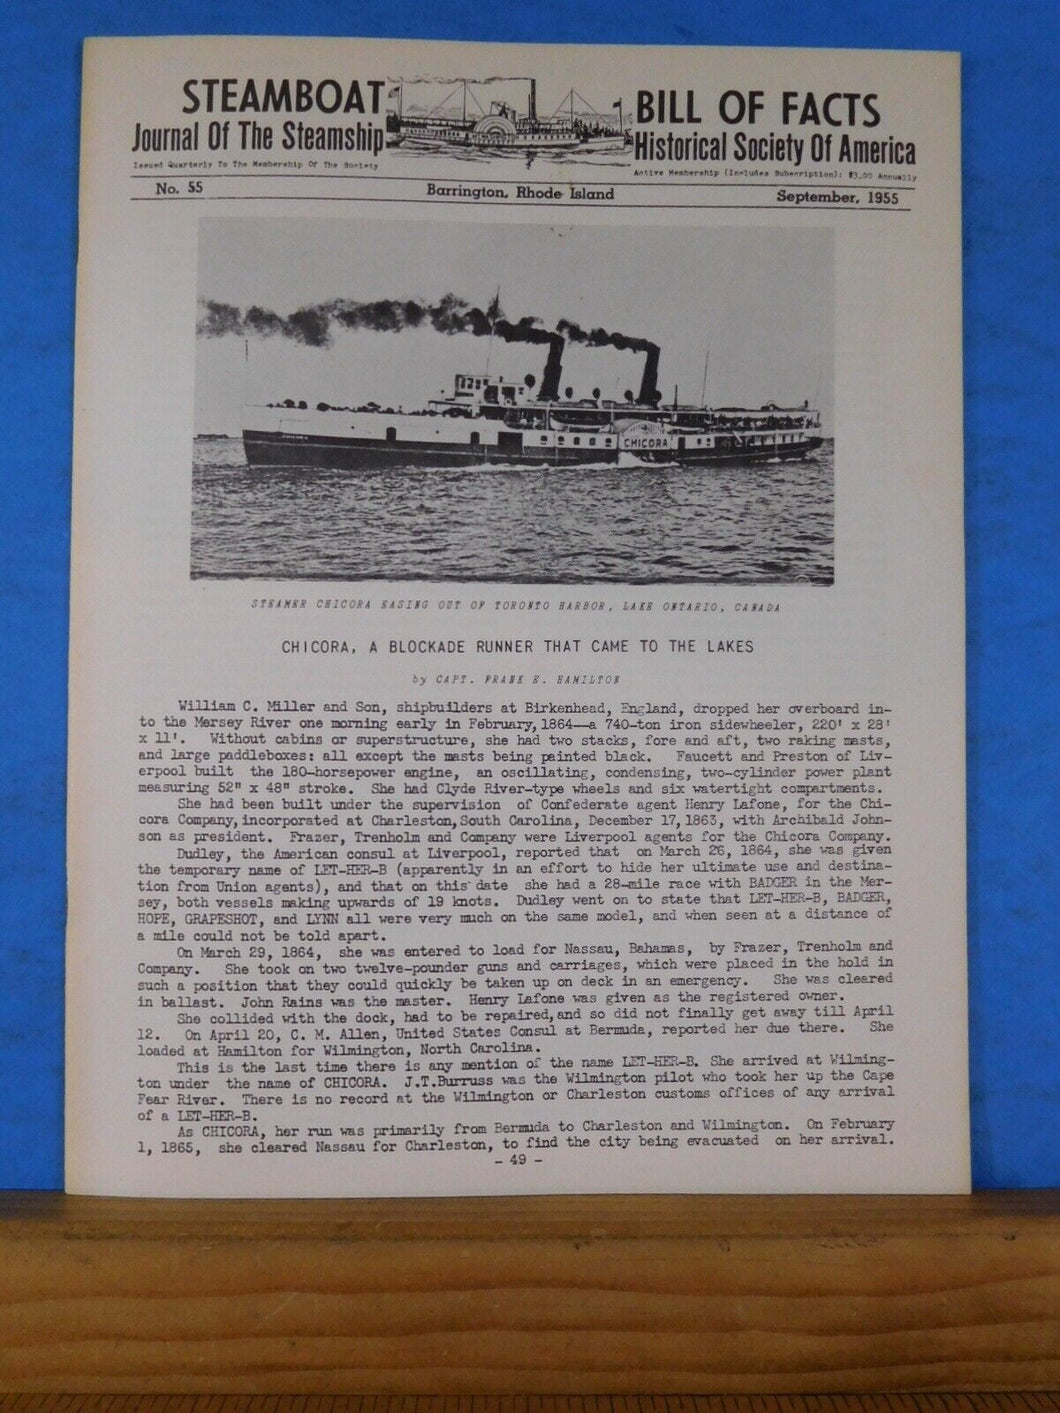 Steamboat Bill #55 September 1955 Journal of the Steamship Historical Society